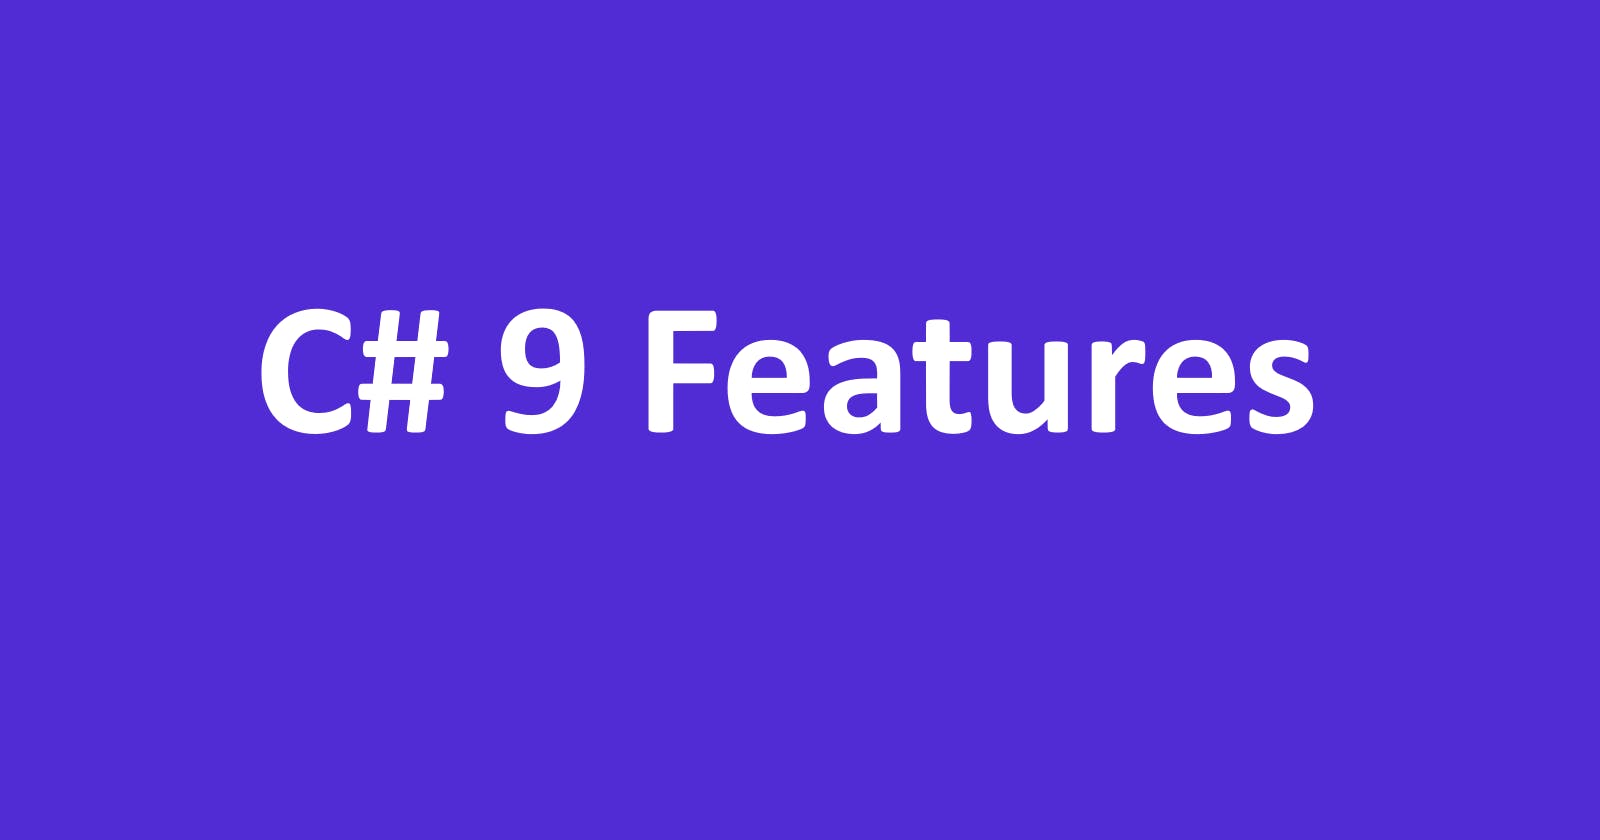 A comprehensive overview of C# 9 features